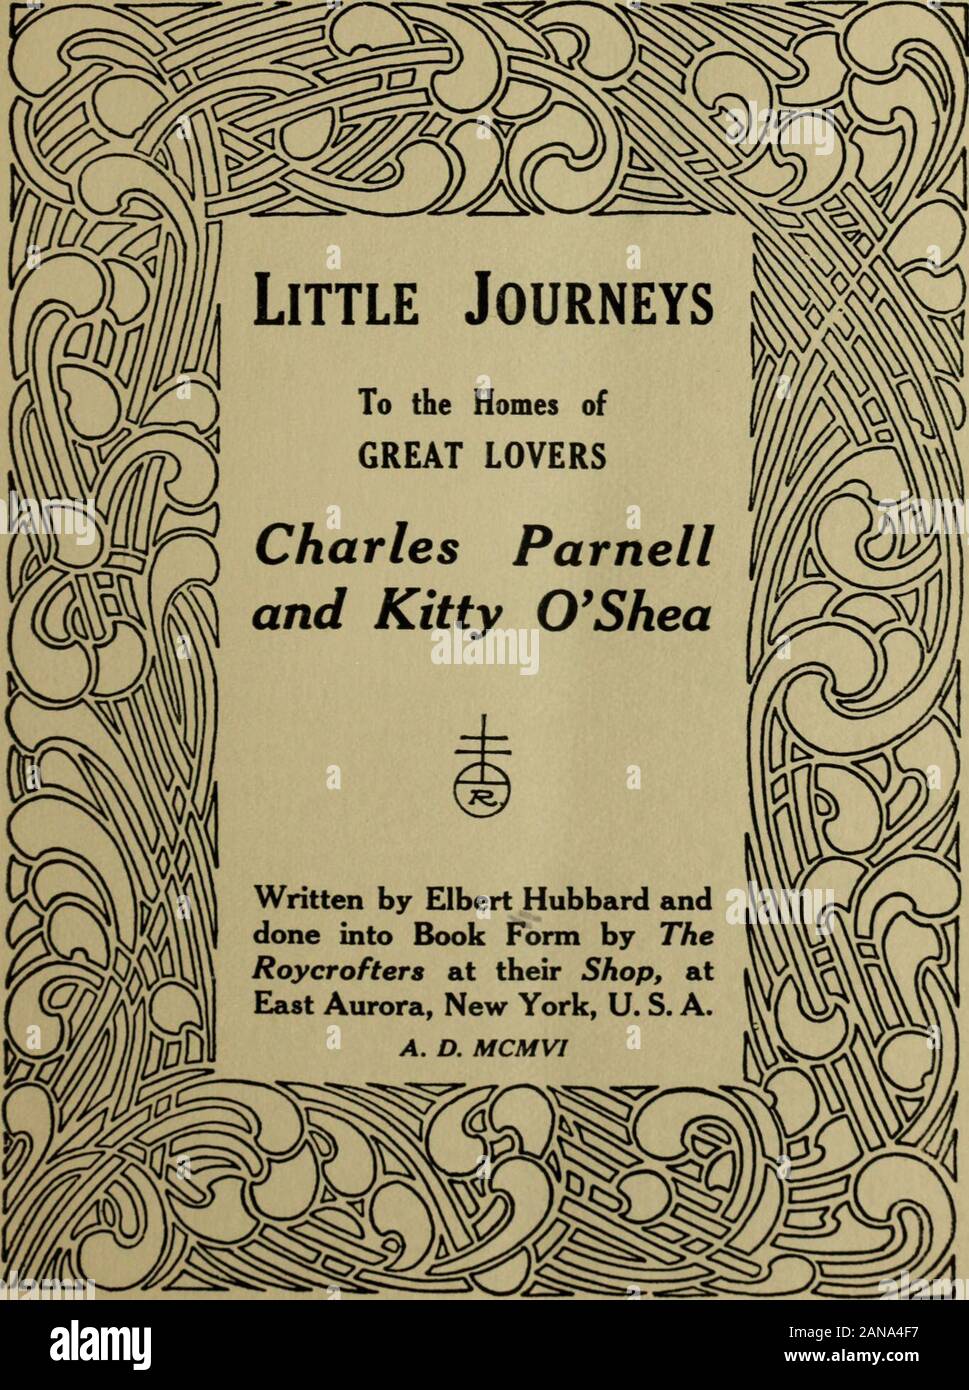 Little journeys to the homes of great lovers : Charles Parnell and Kitty O'Shea . I asked him the reason. He replied, * I havenot had a headache since I left off drinking coffee, some monthsago, till last week, when I began again, here at your table. Idont see how anyone can like coffee, anyway, after drinkingPostum! I said nothing, but at once ordered a package of Postum.That was five months ago, and we have drarik no other coffeesince, except on two occasions when we had company, and theresult each time was that my husband could not sleep, but layawake and tossed and talked half the night. W Stock Photo